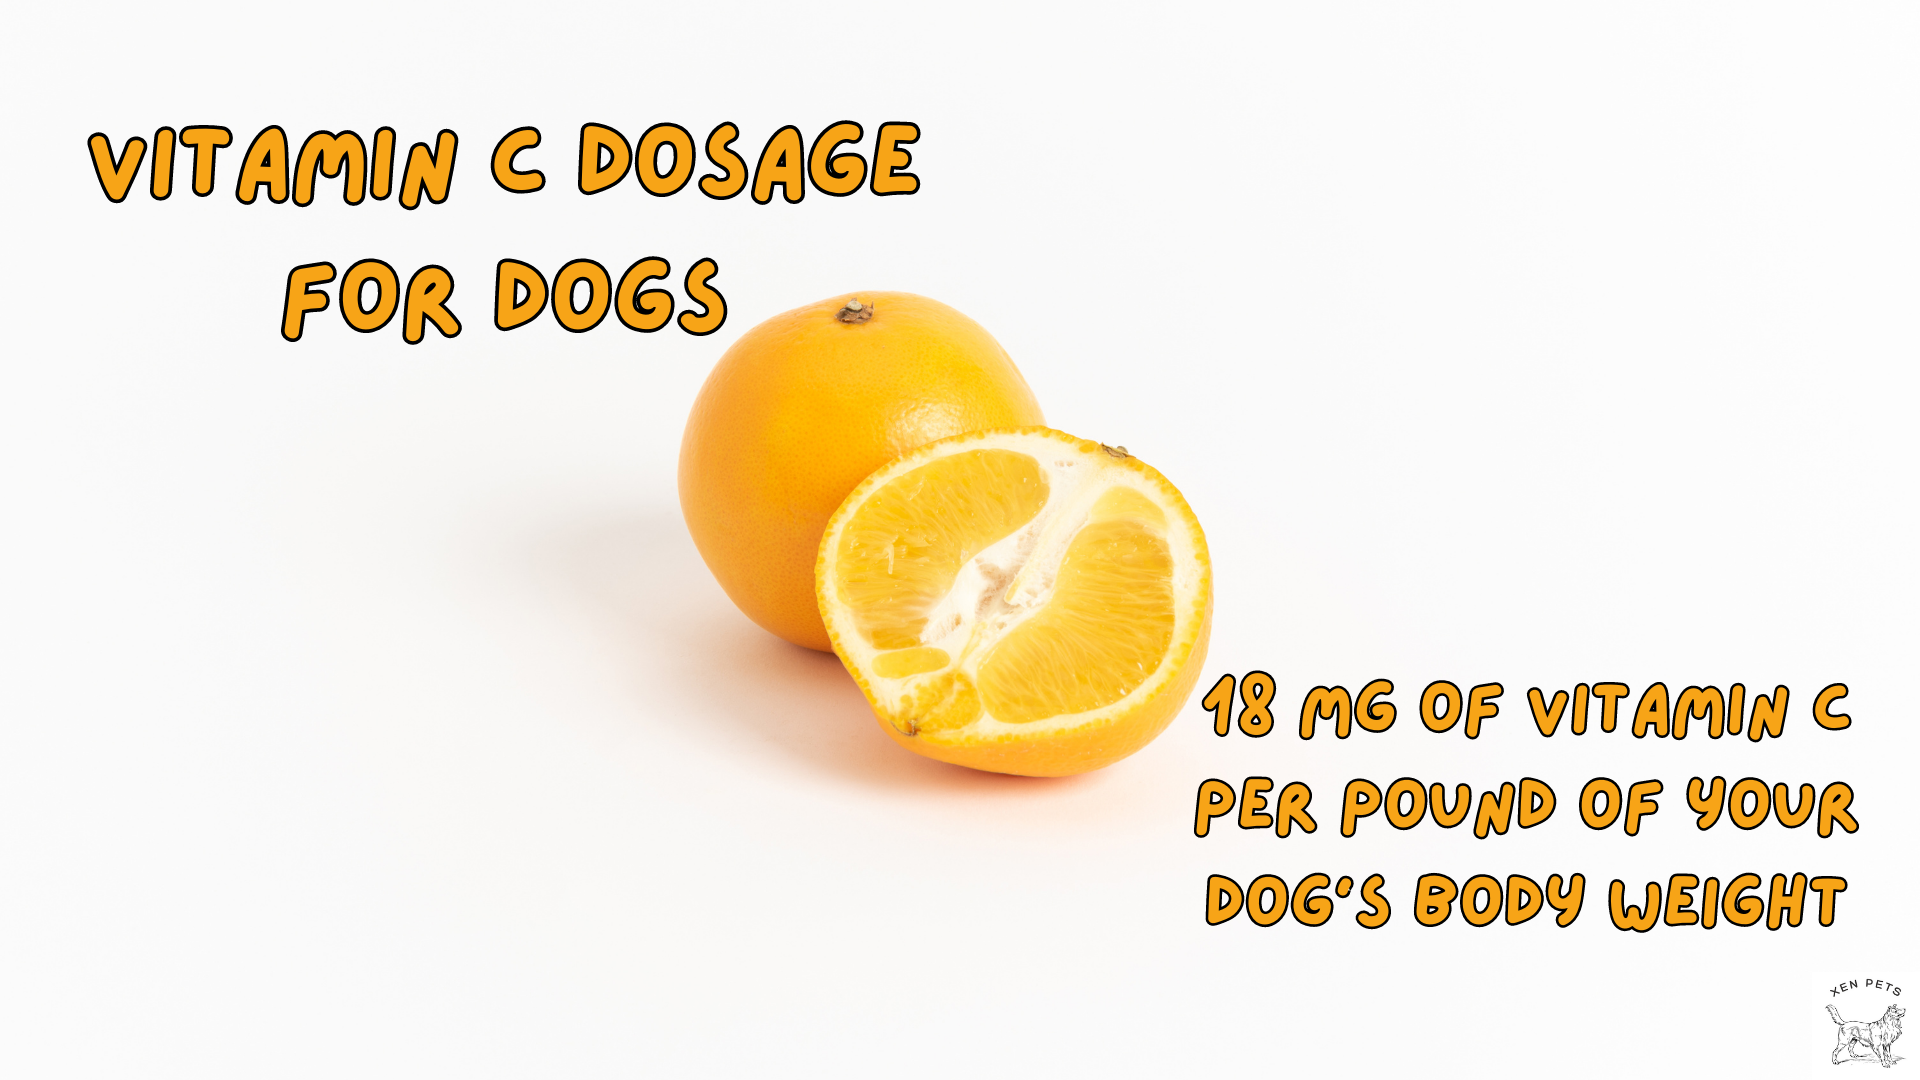 Vitamin C Dosage for Dogs